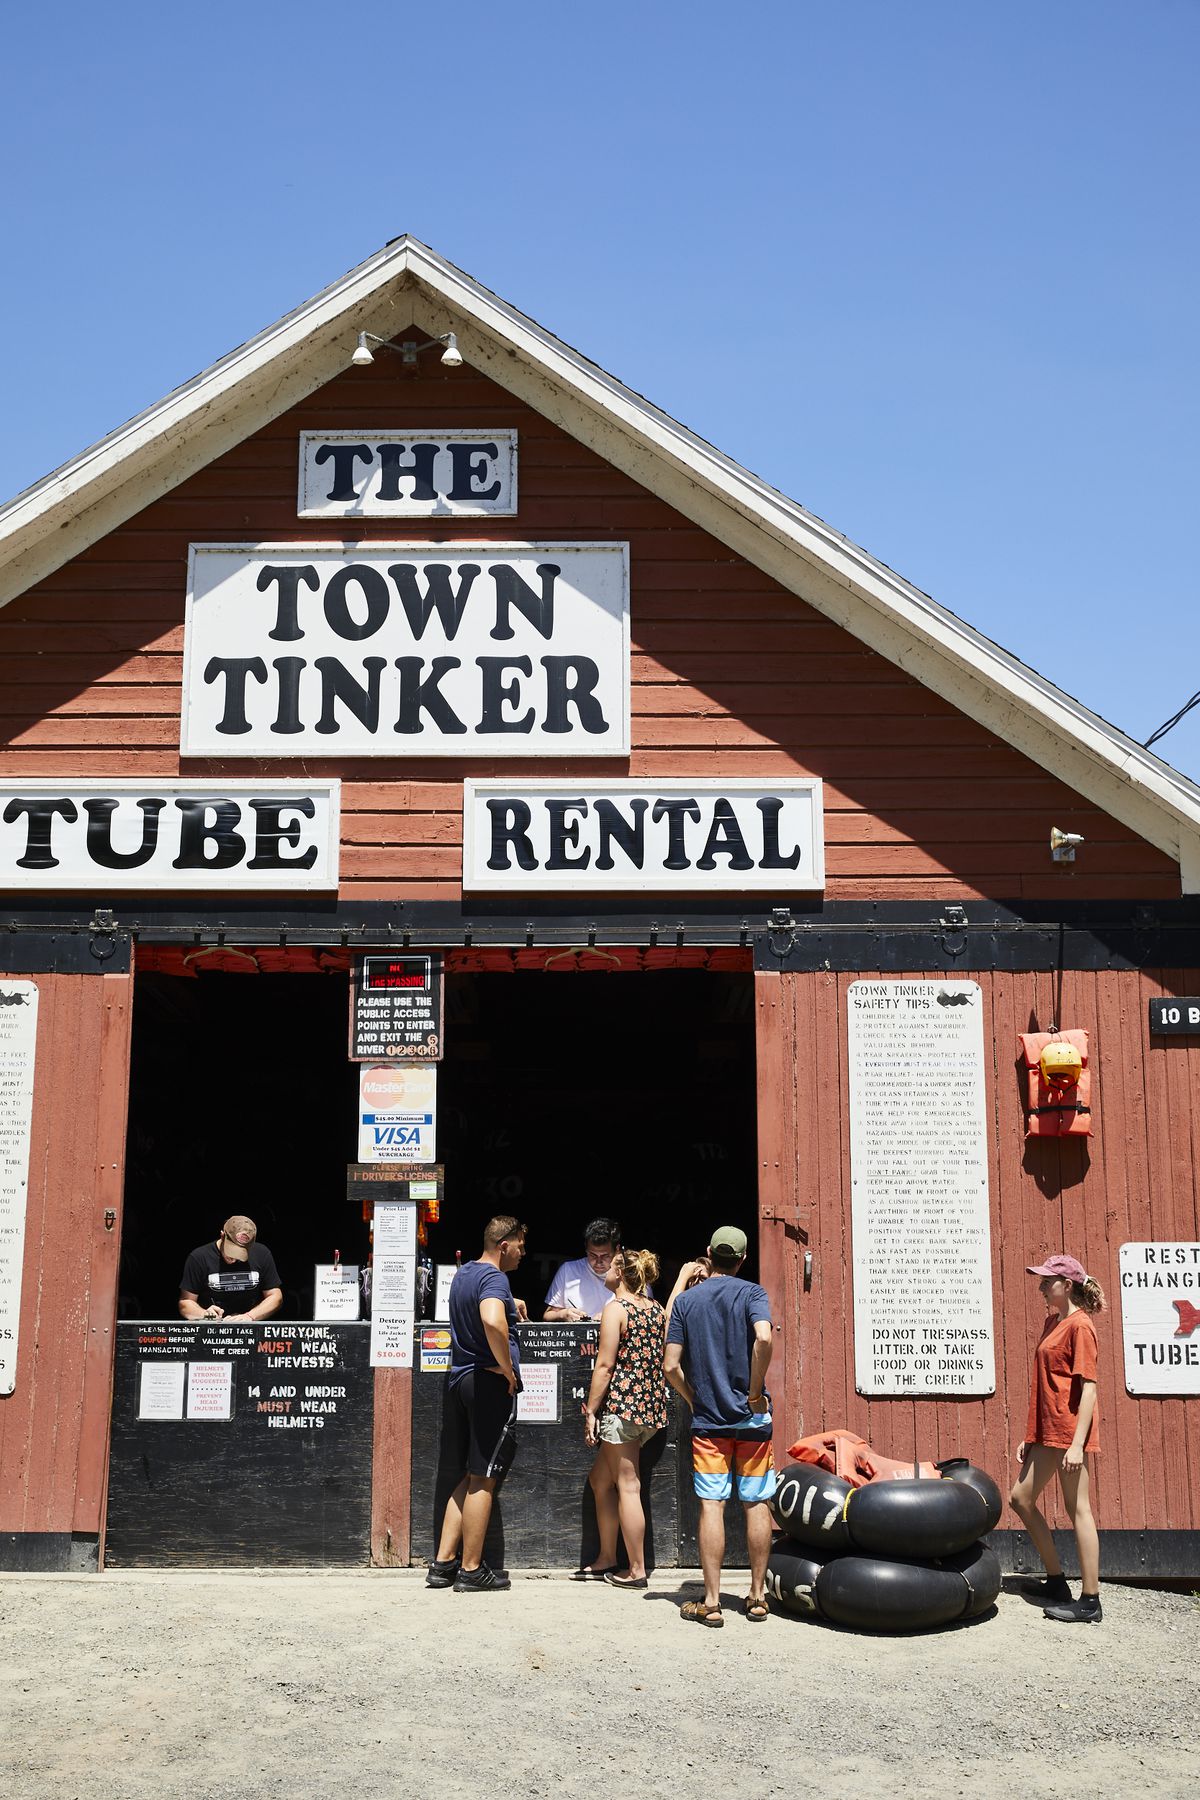 A red shed with a sign that reads The Town Tinker Tube Rental. There are people standing outside and inside the shed.